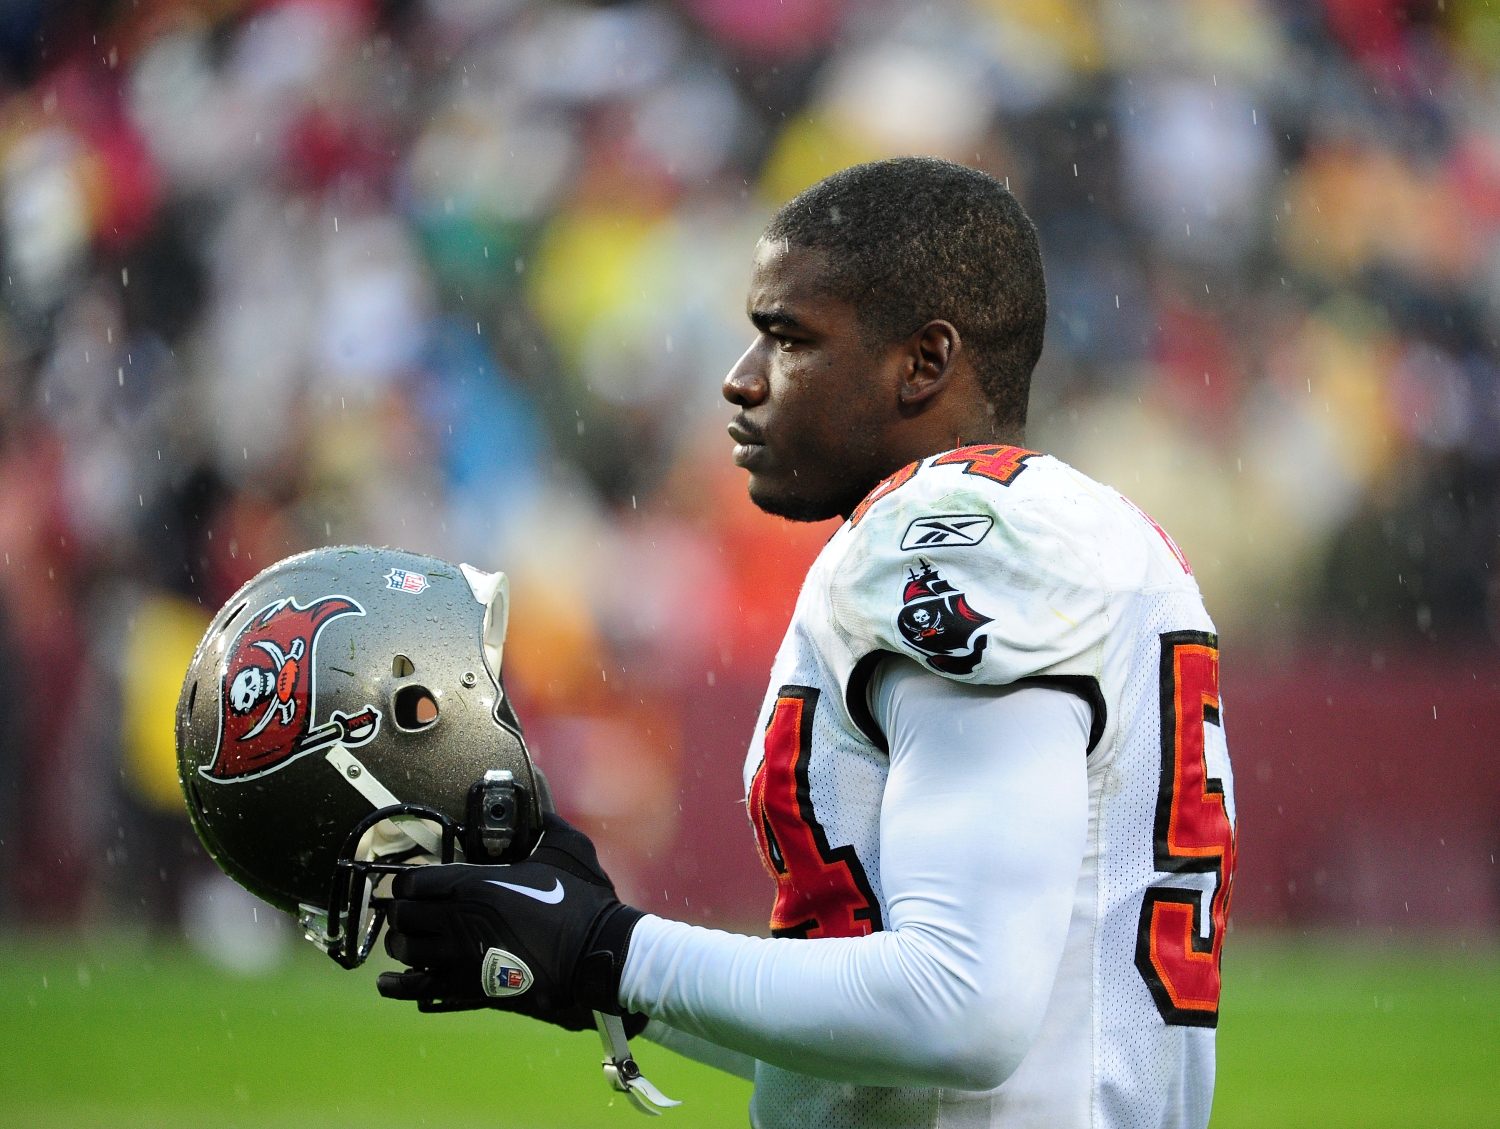 Tampa Bay Buccaneers linebacker Geno Hayes holds his helmet during a game.